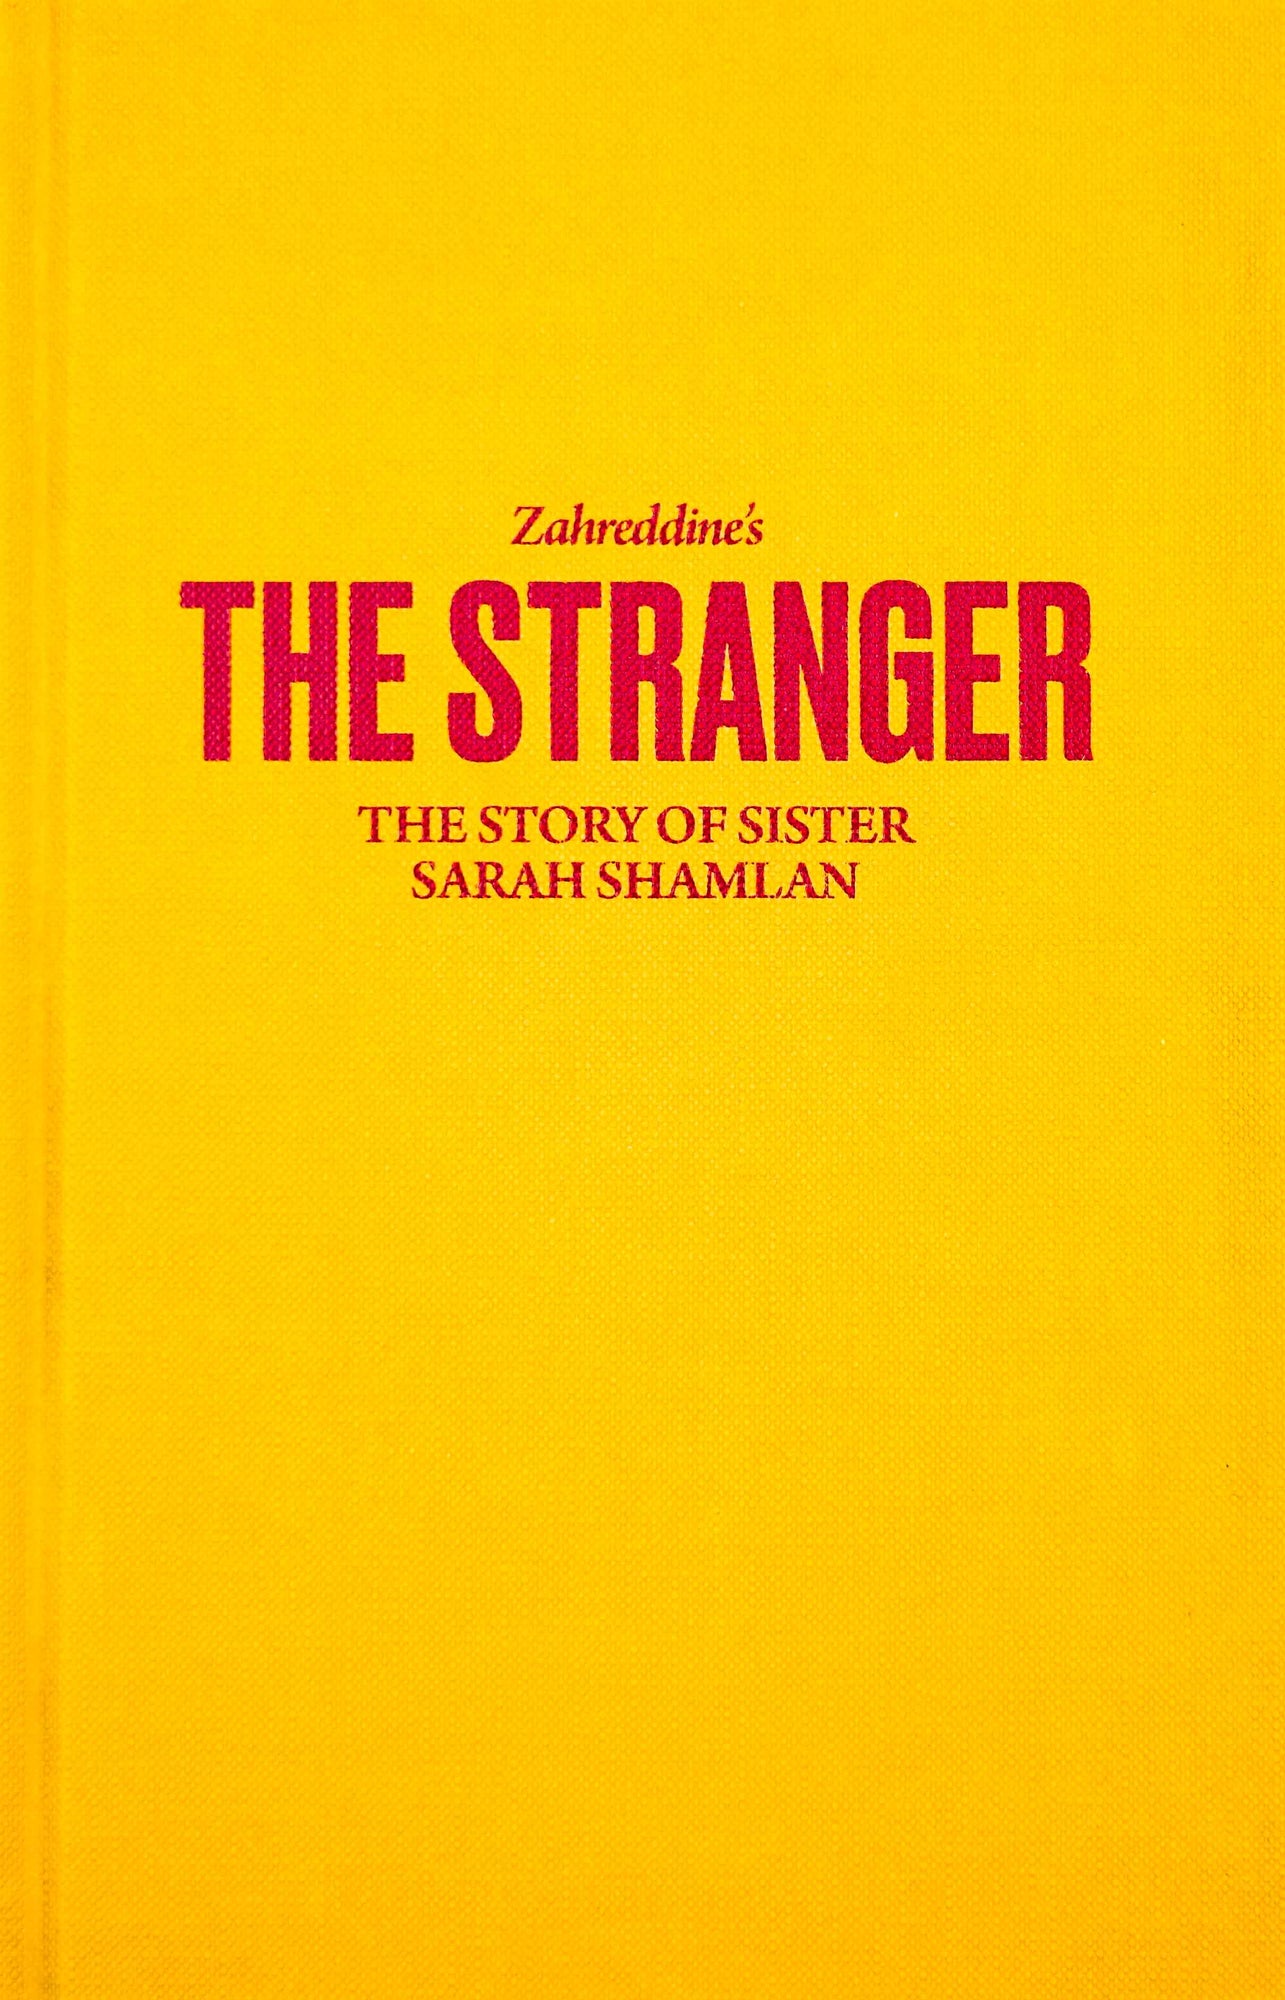 title and author in caps and red centred. yellow background.